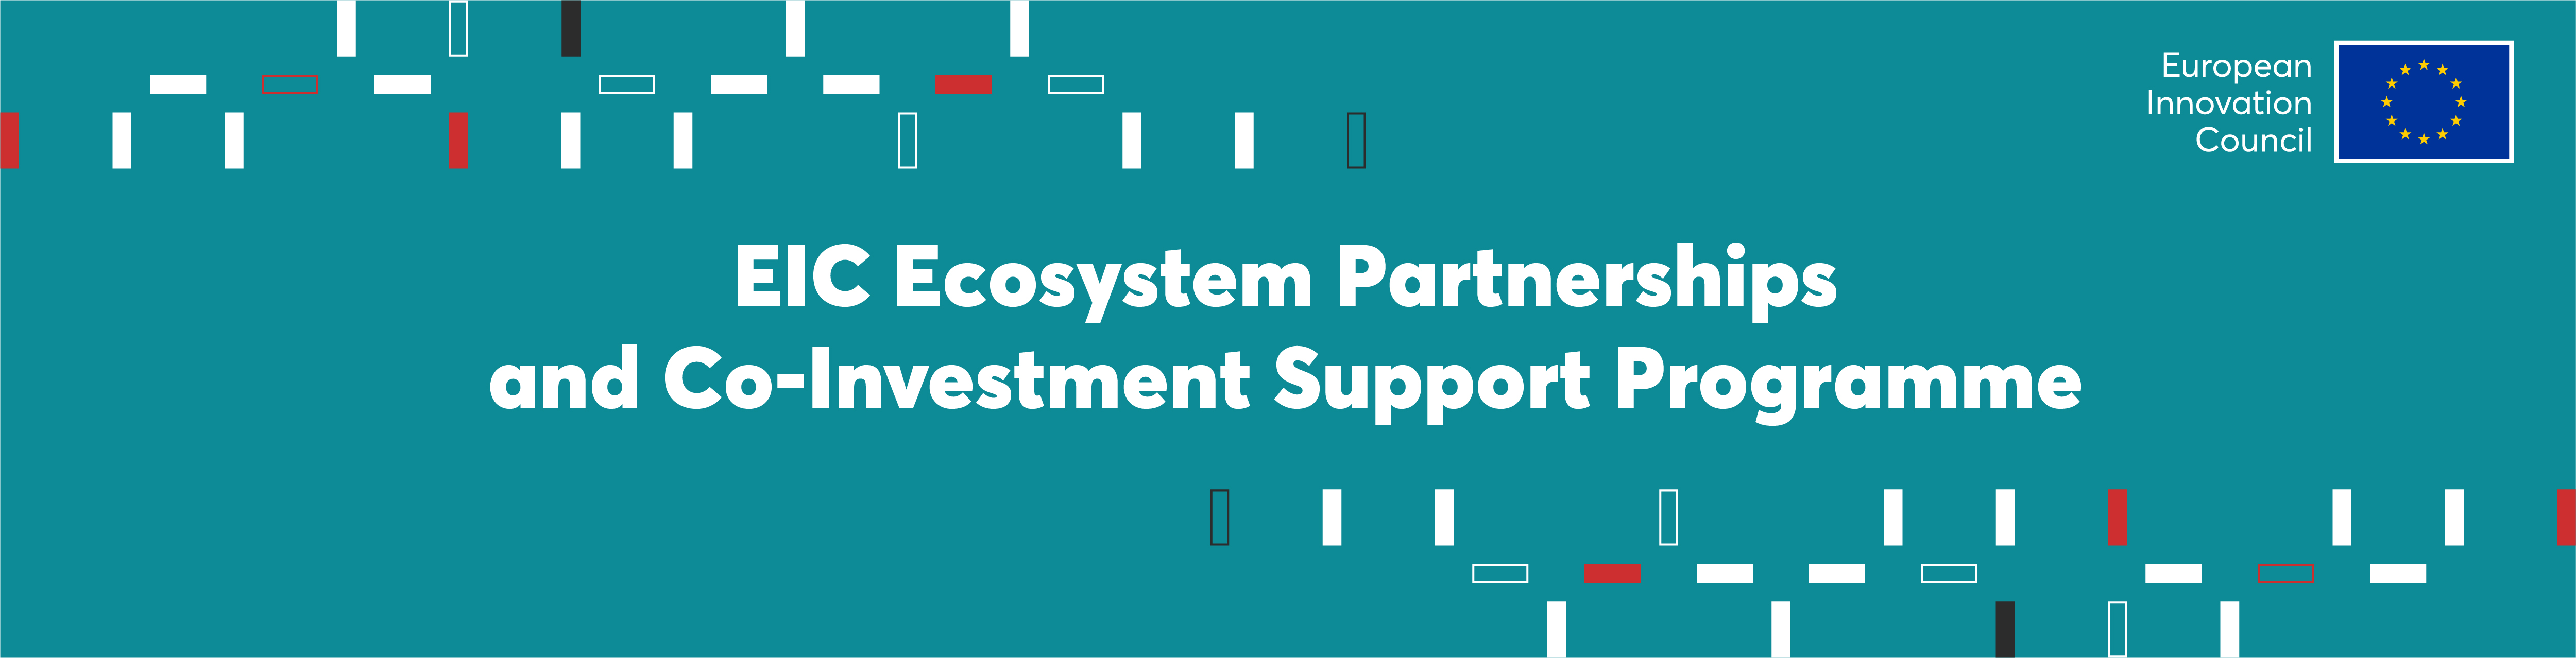 Ecosystem Partnerships and Co-Investment Support Programme Banner